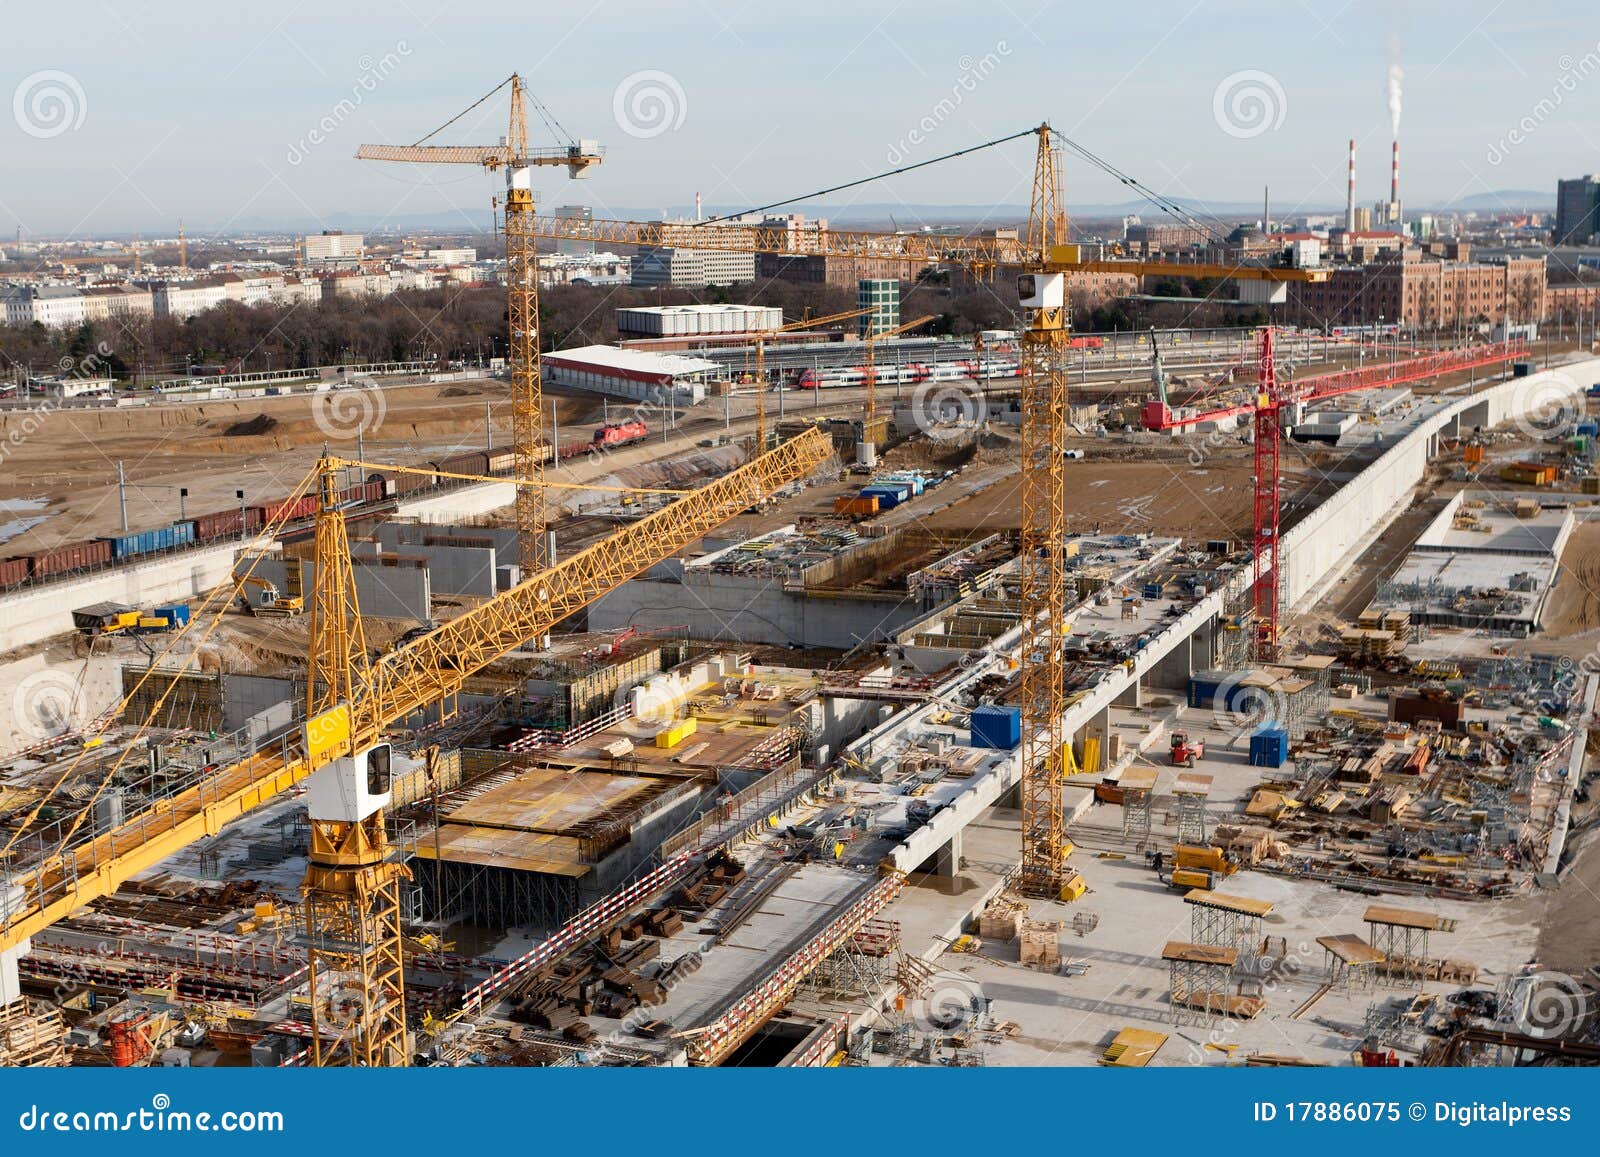 Building site stock image. Image of project, development - 17886075